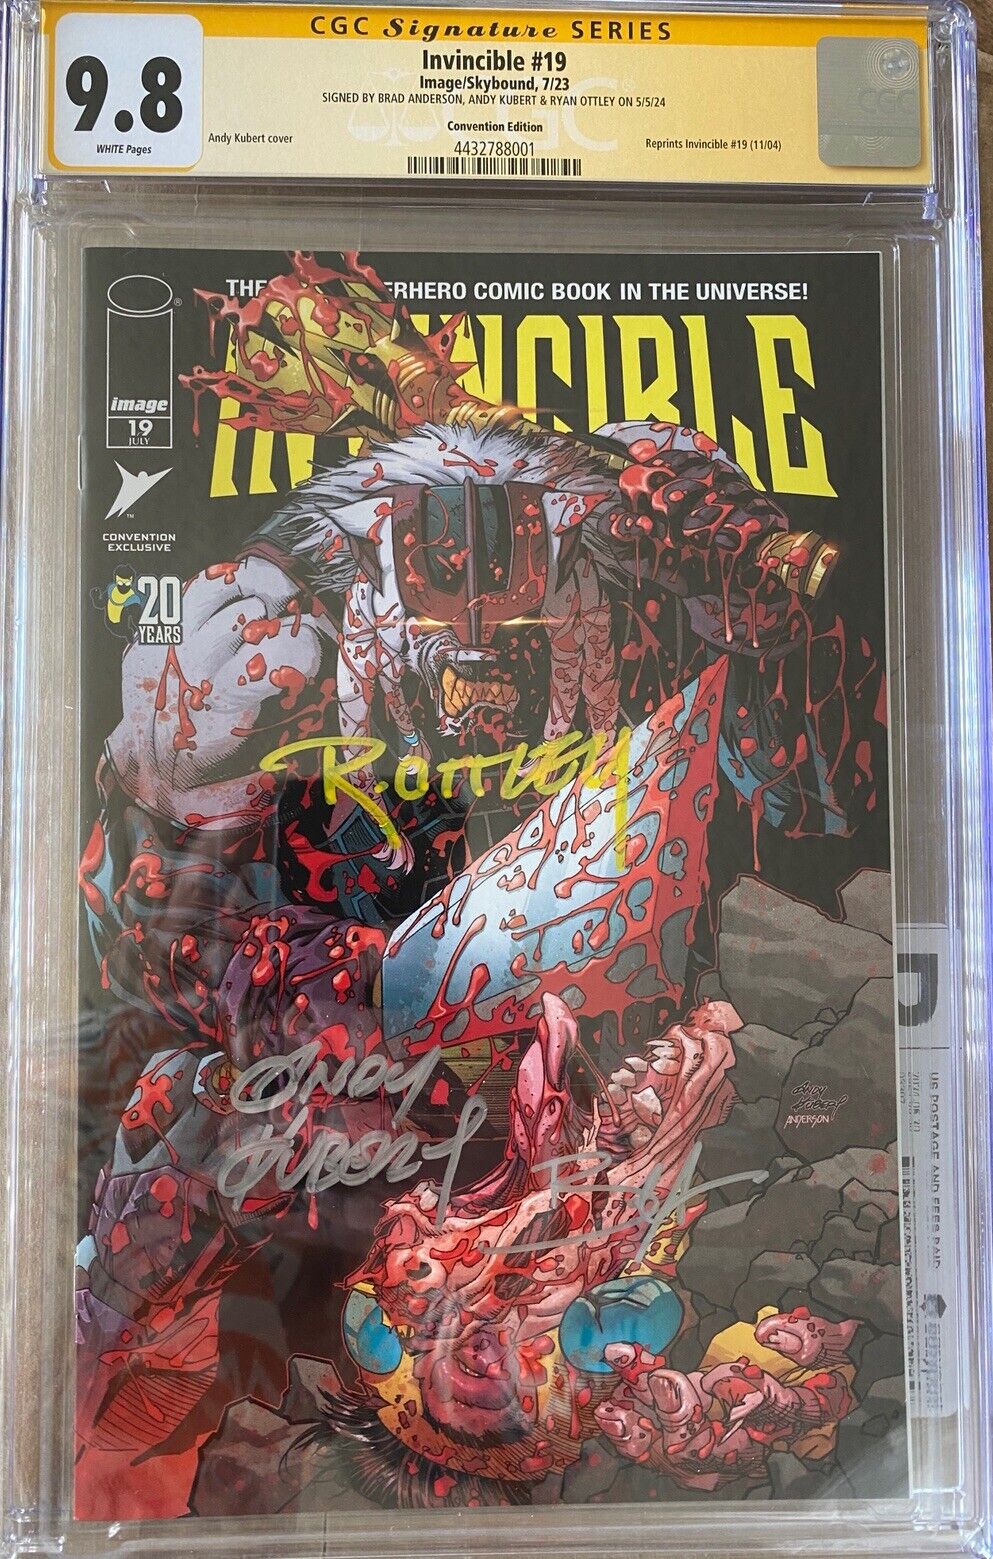 Invincible #19 CGC 9.8 Andy Kubert Variant SOLD OUT SDCC 2023 3X SIGNED